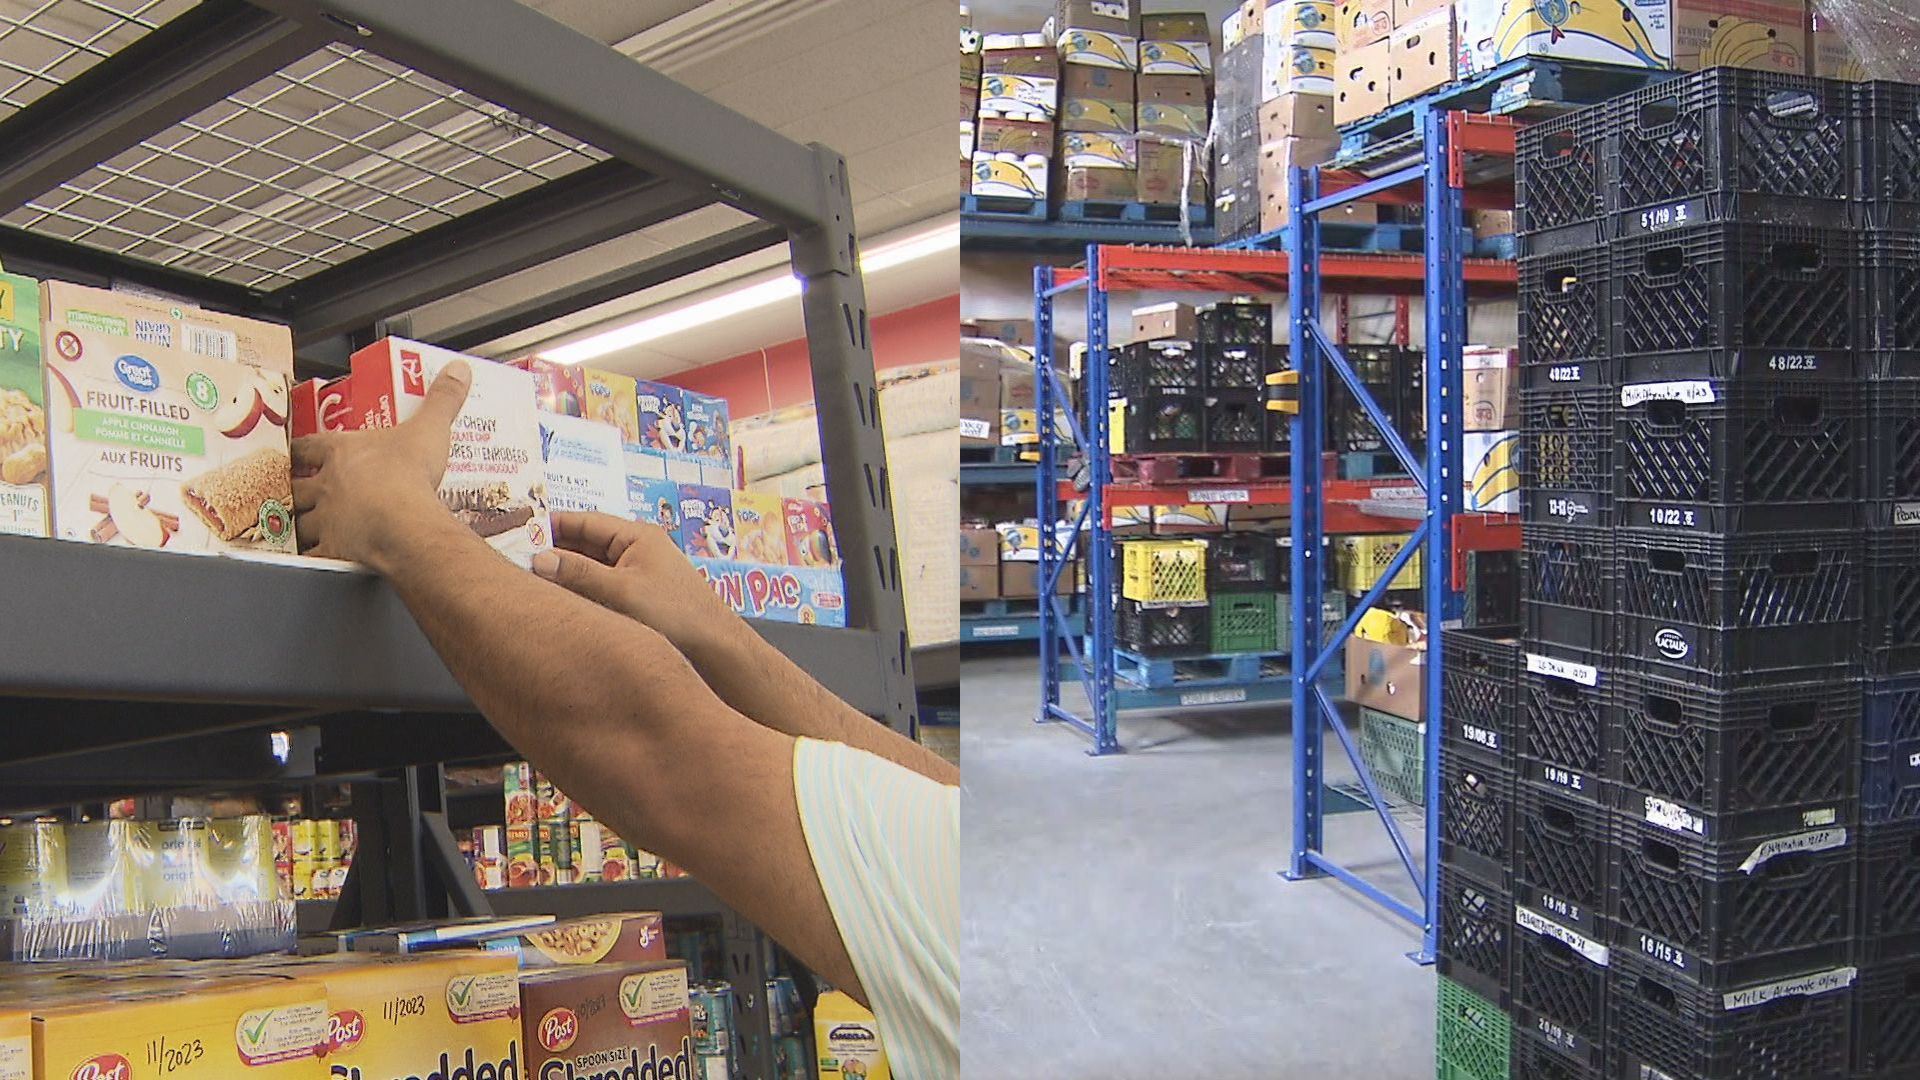 B.C. given D+ grade in latest Food Banks Canada poverty report